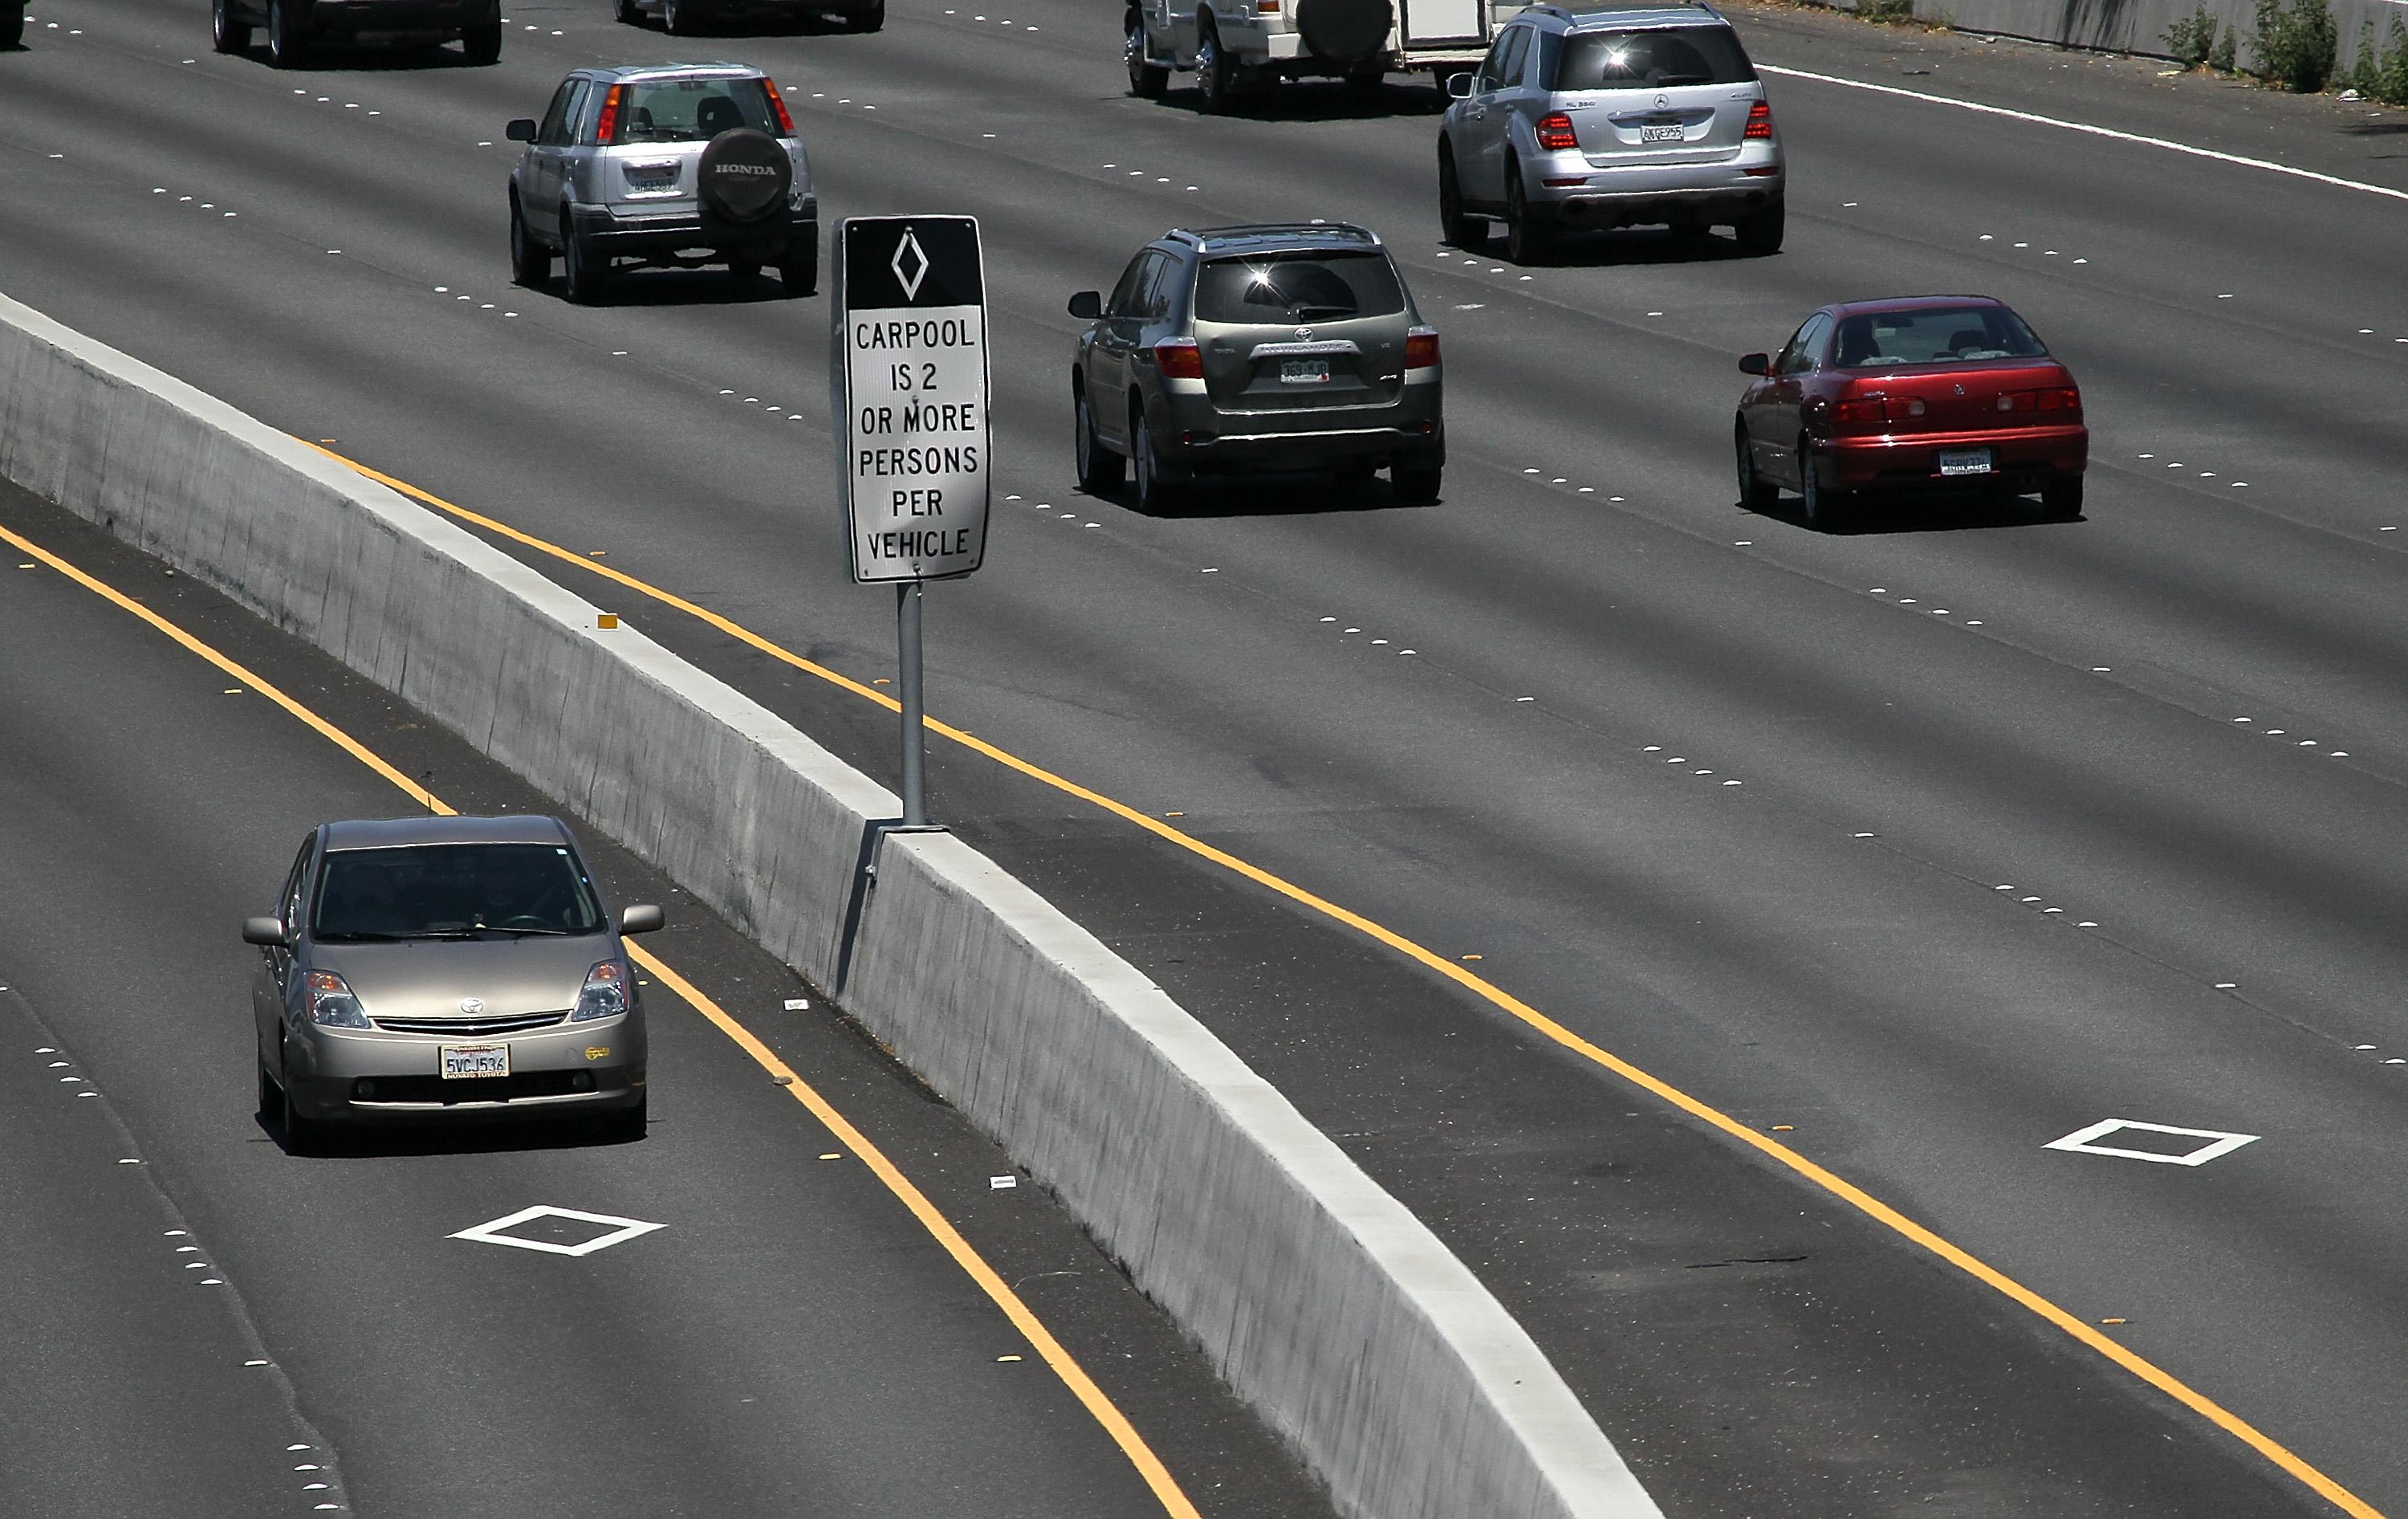 Socialist Lanes or Congestion Pricing for California?